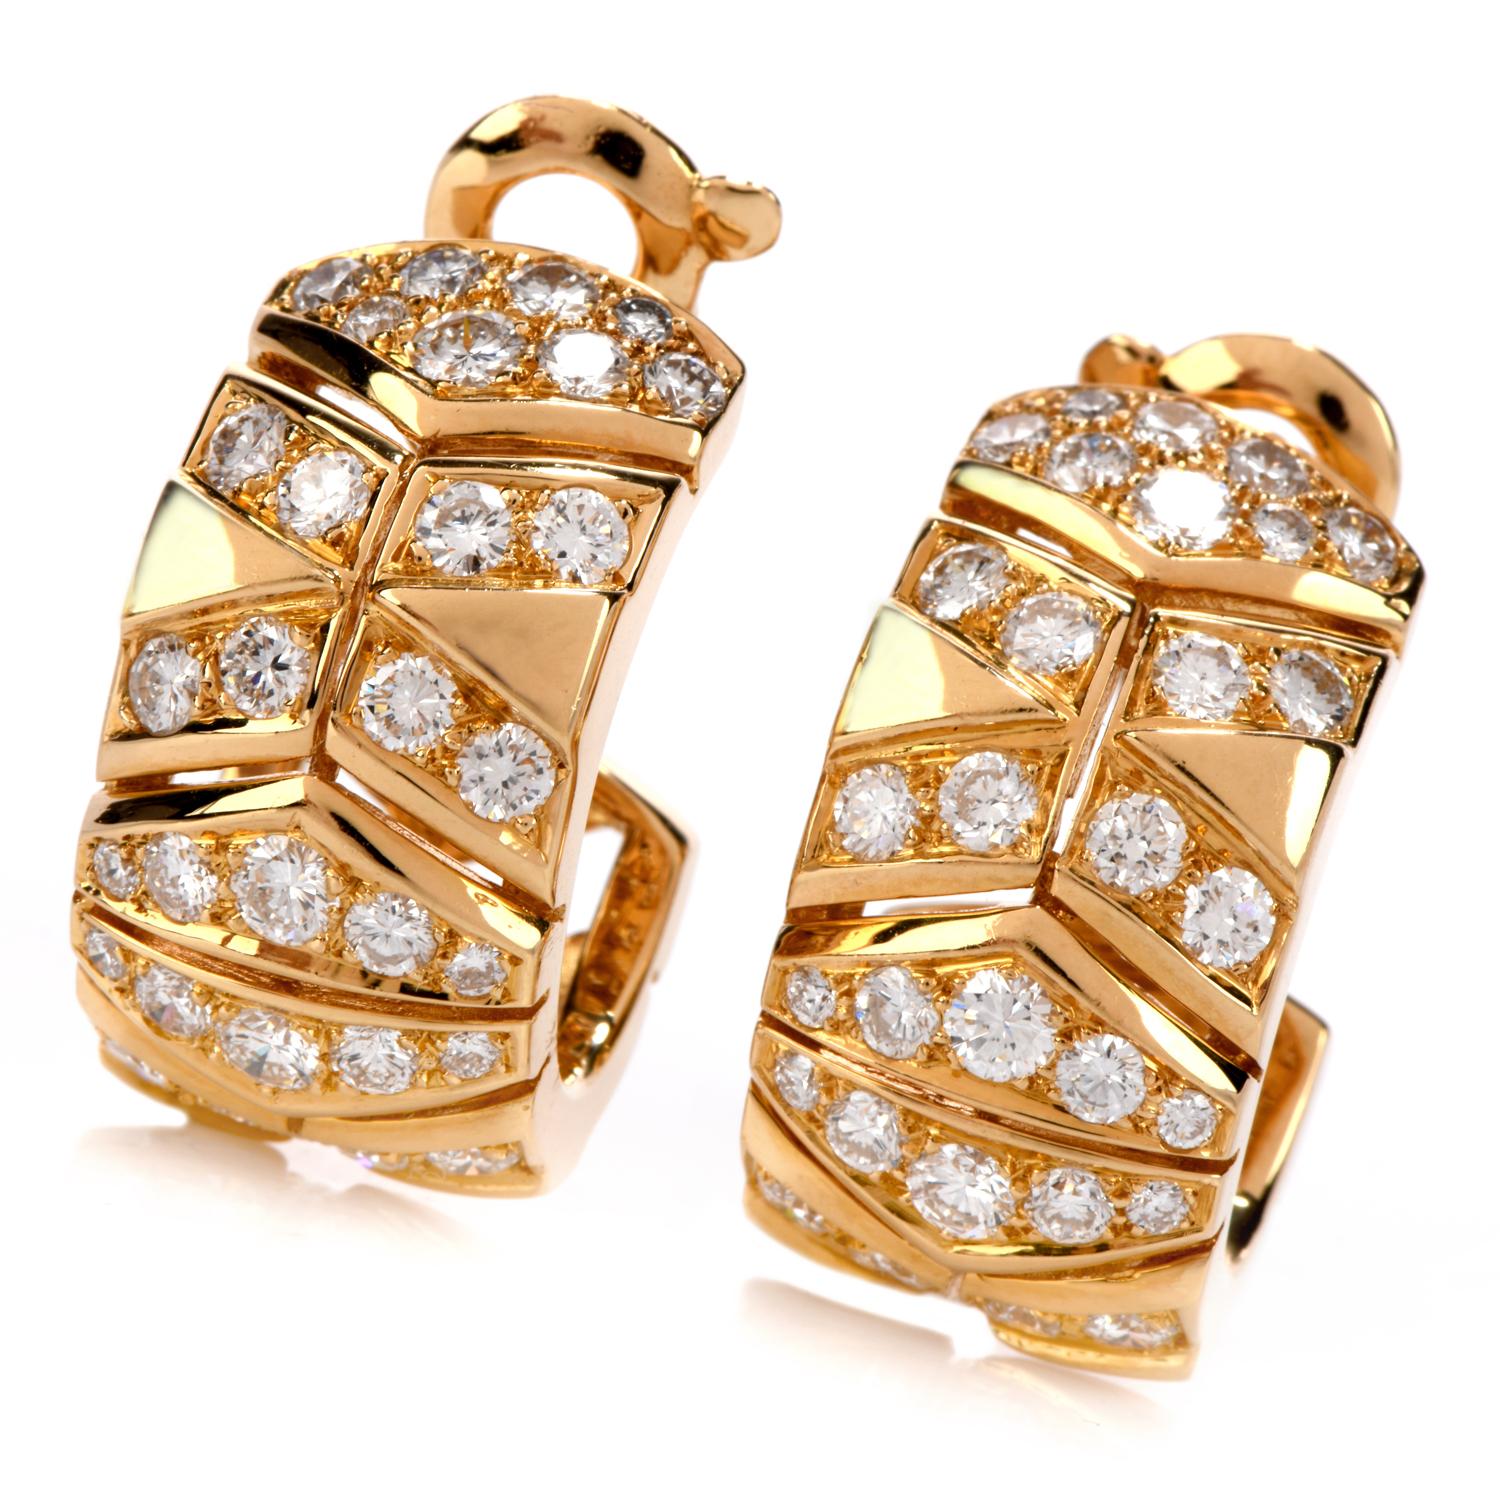 Carry your nostalgia for 90s Vintage designer pieces into your present day with these gorgeous Cartier Diamond 18K Gold Chevron Clip on Hoop Earrings!  These earrings have approx. 68 round cut diamonds, totaling approx. 3.00 Carats.  Each diamond